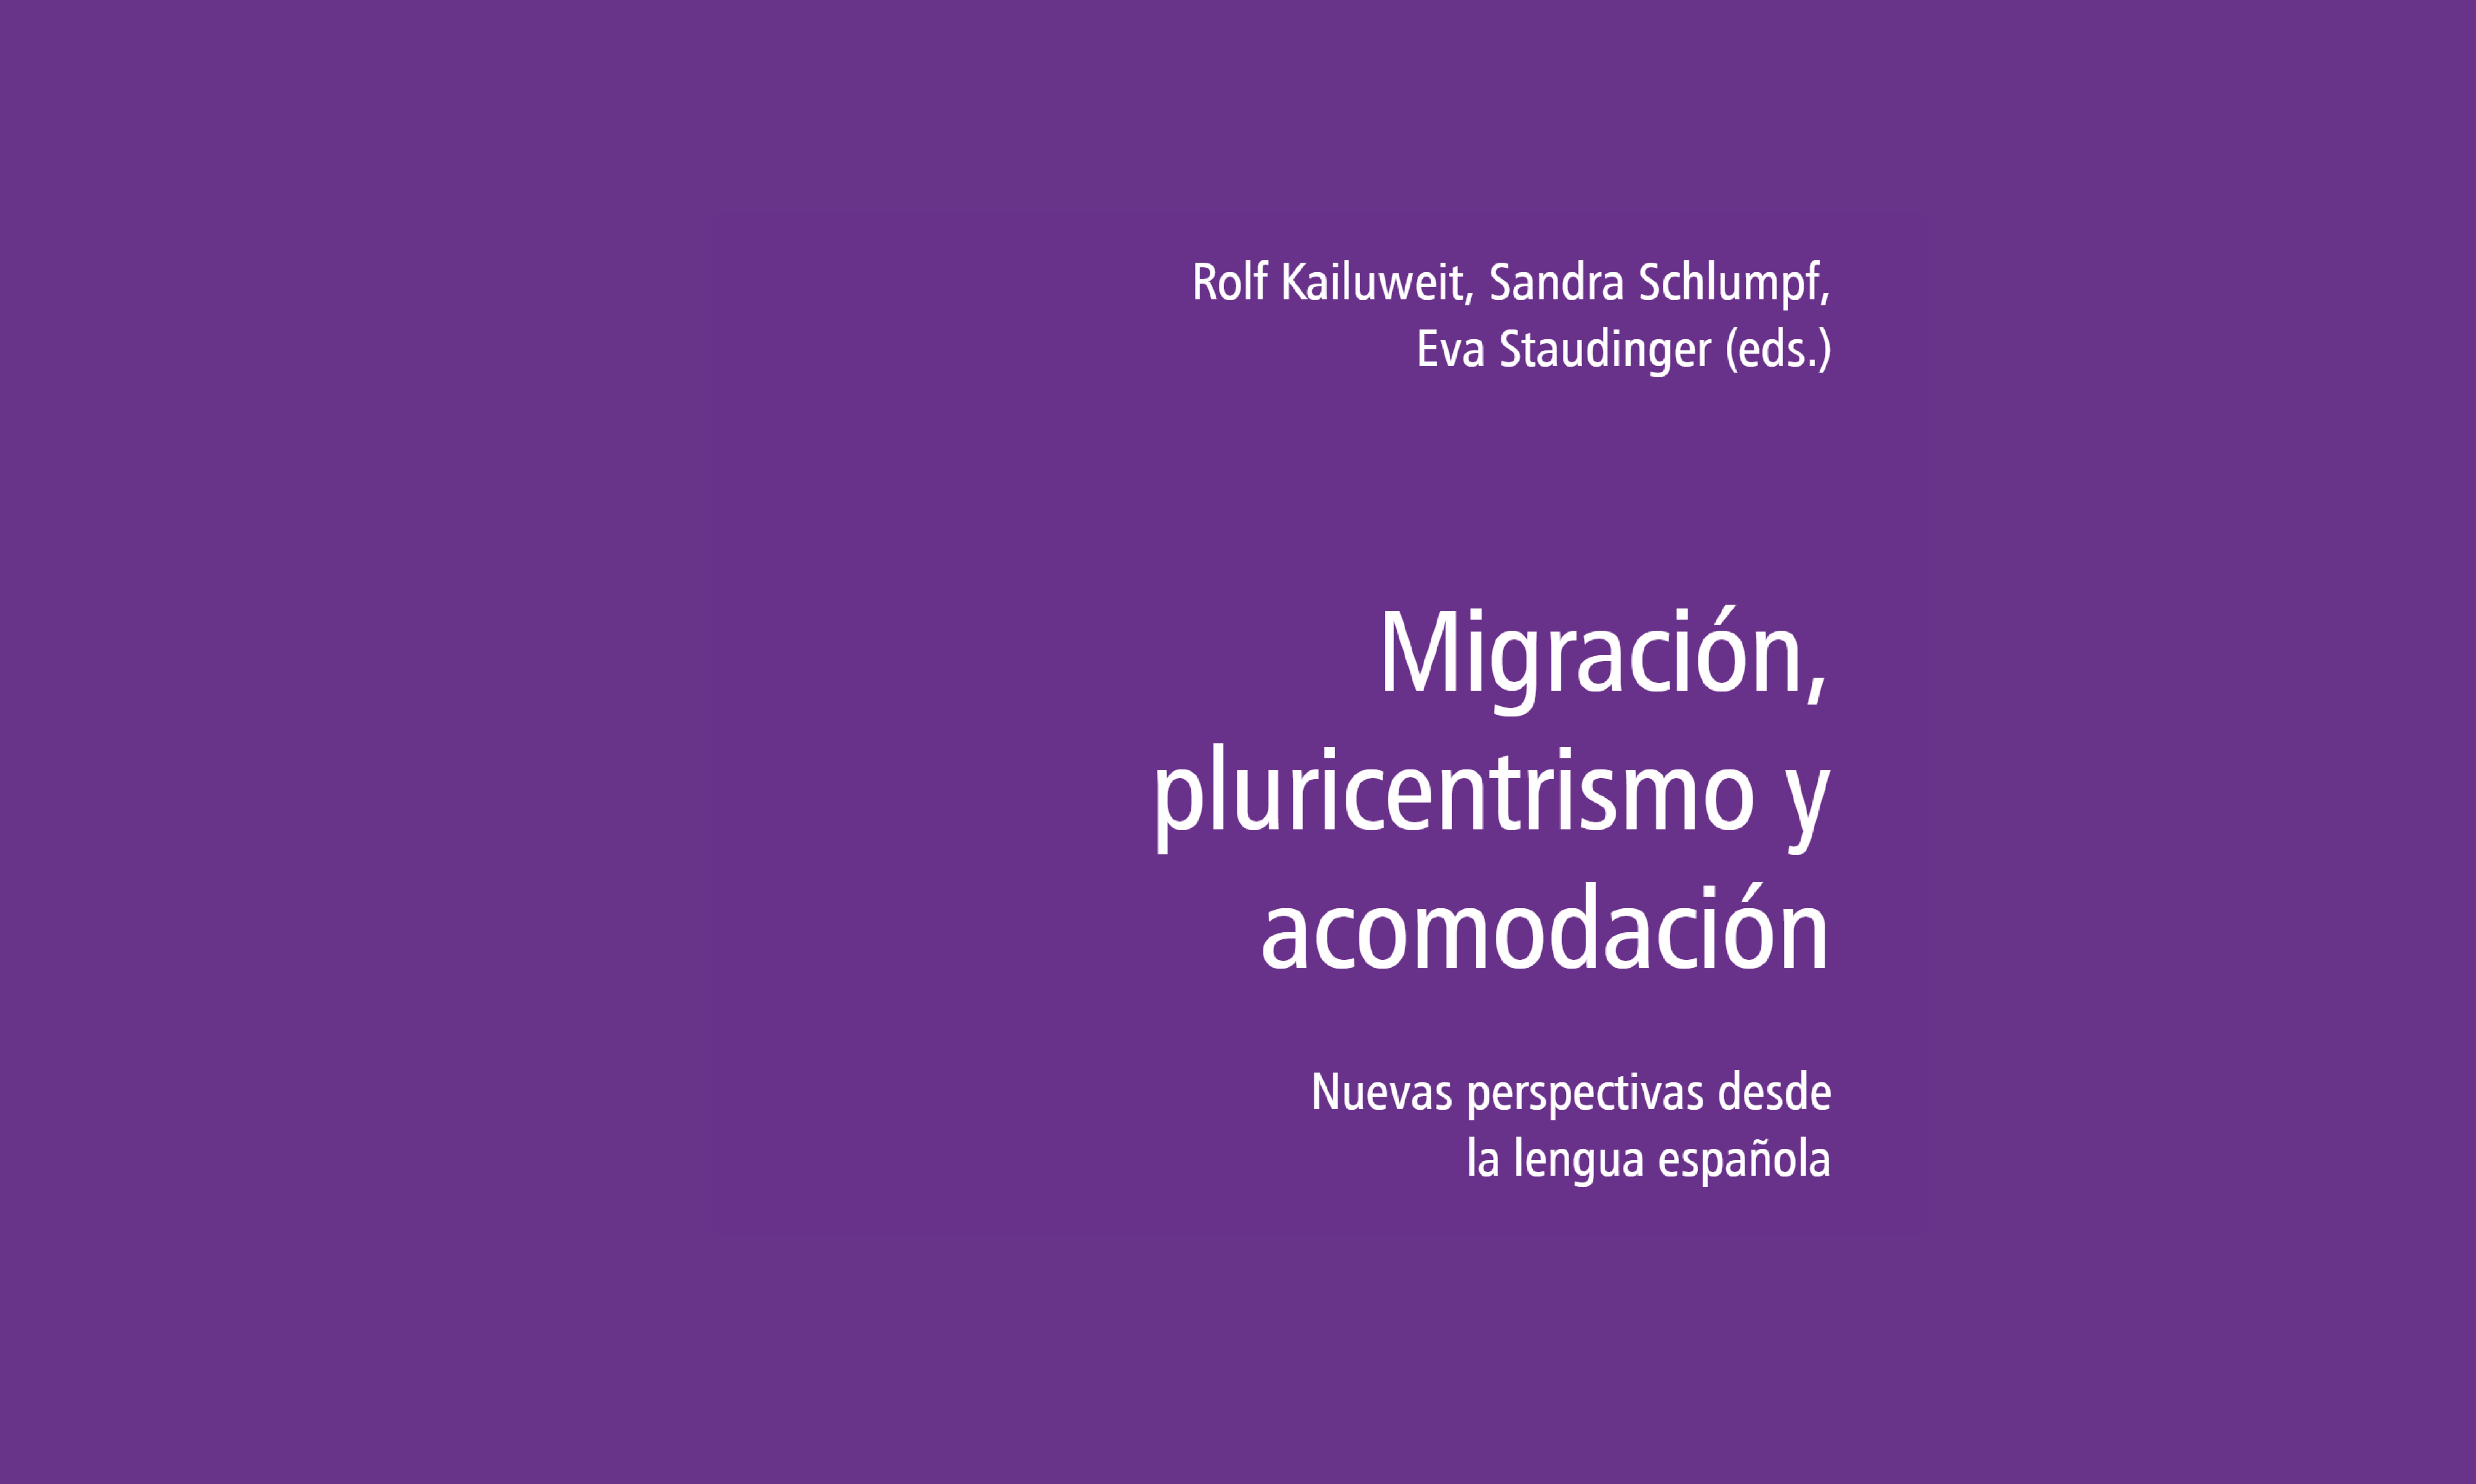 Migration, pluricentrism and accommodation